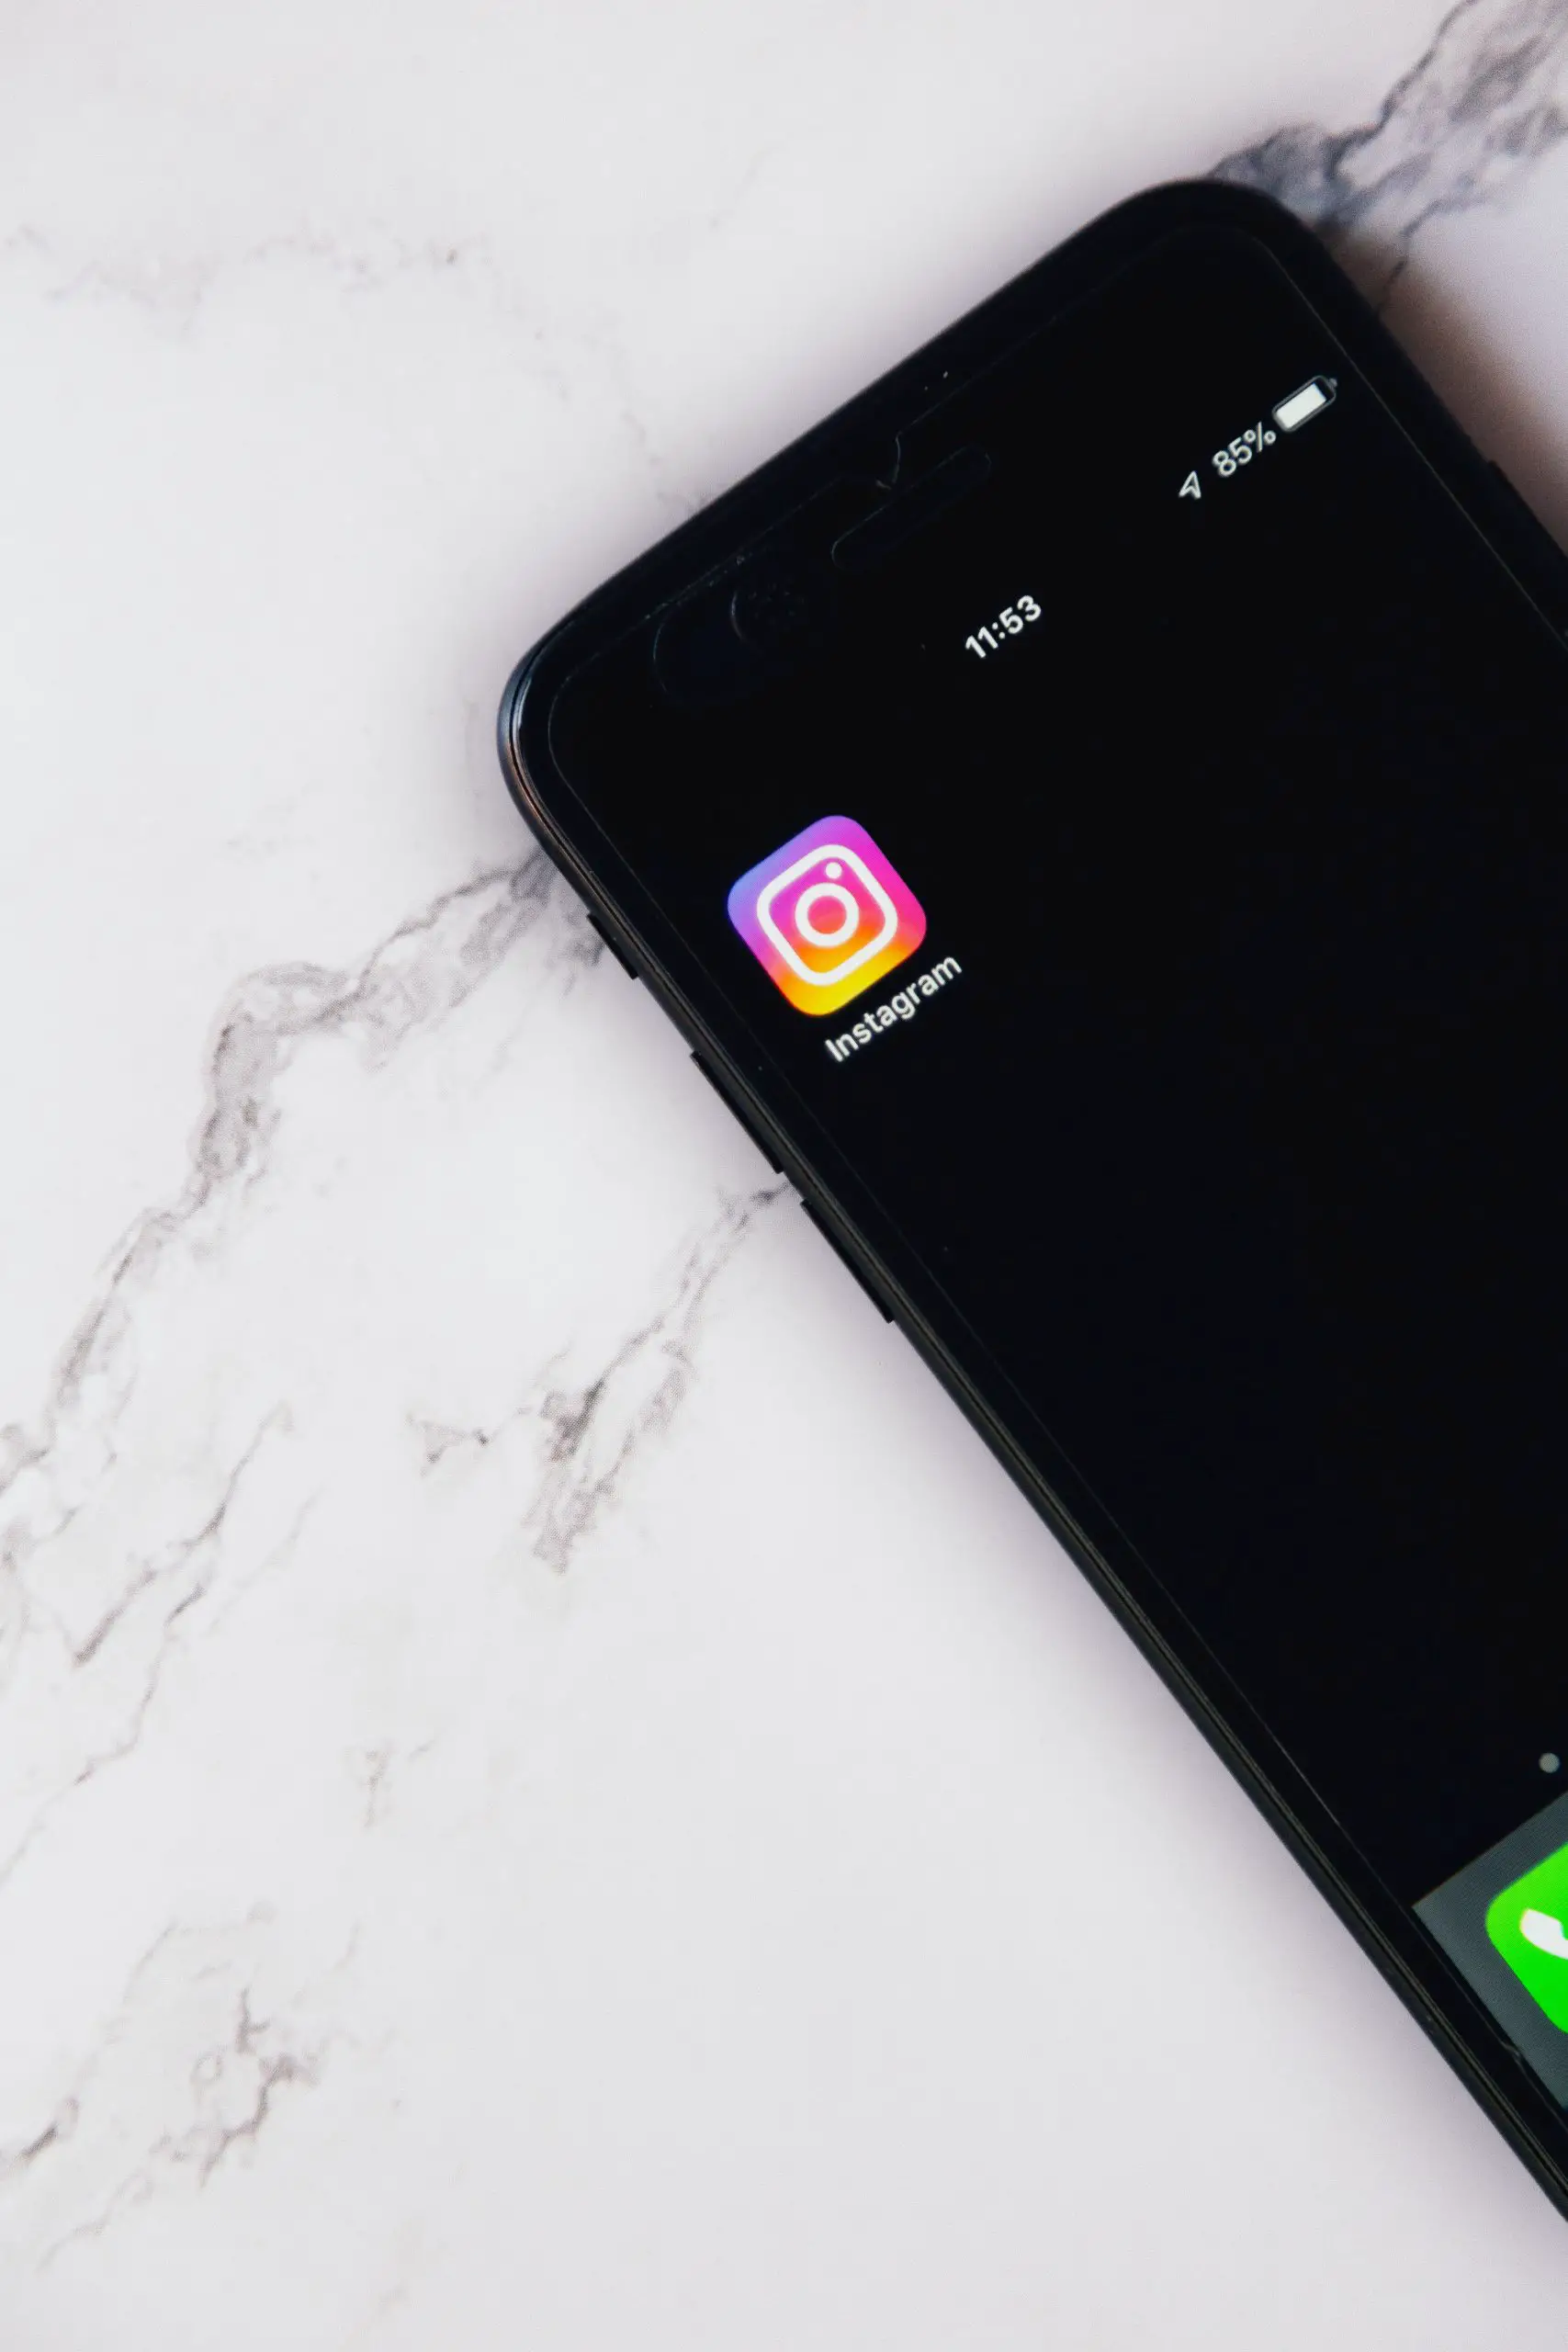 Why Does My Instagram Say I Have A Message When I Don't? Here's Why